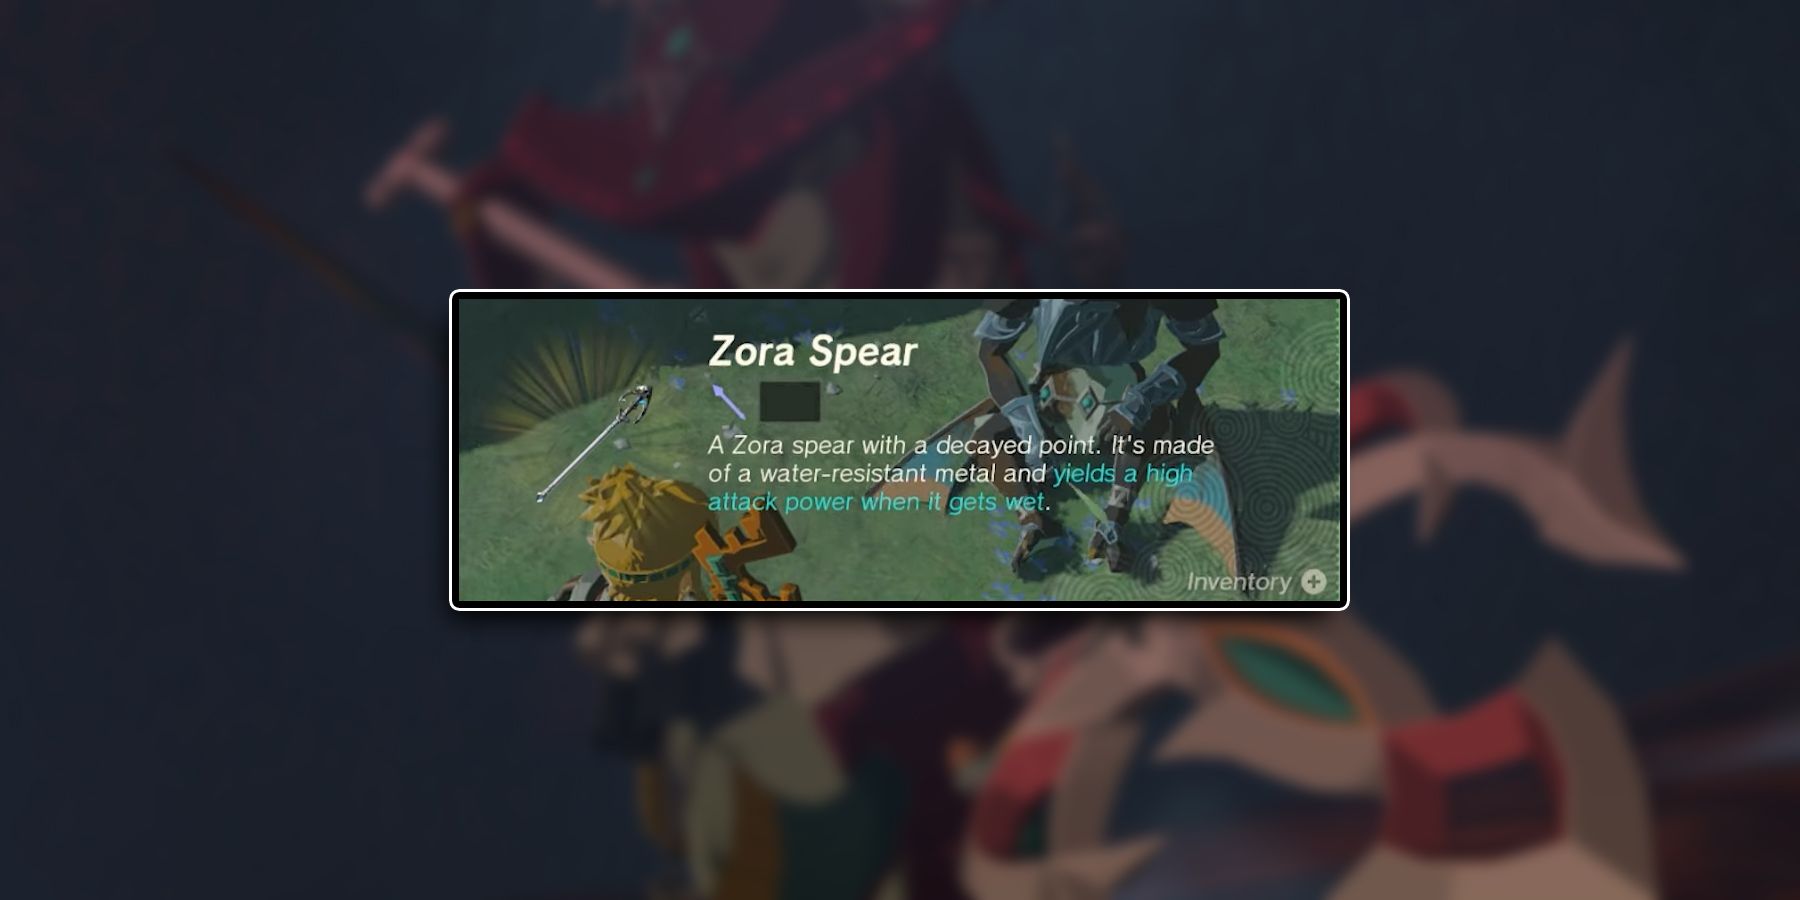 OK, did anyone else find this quest really weird? Like that Zora